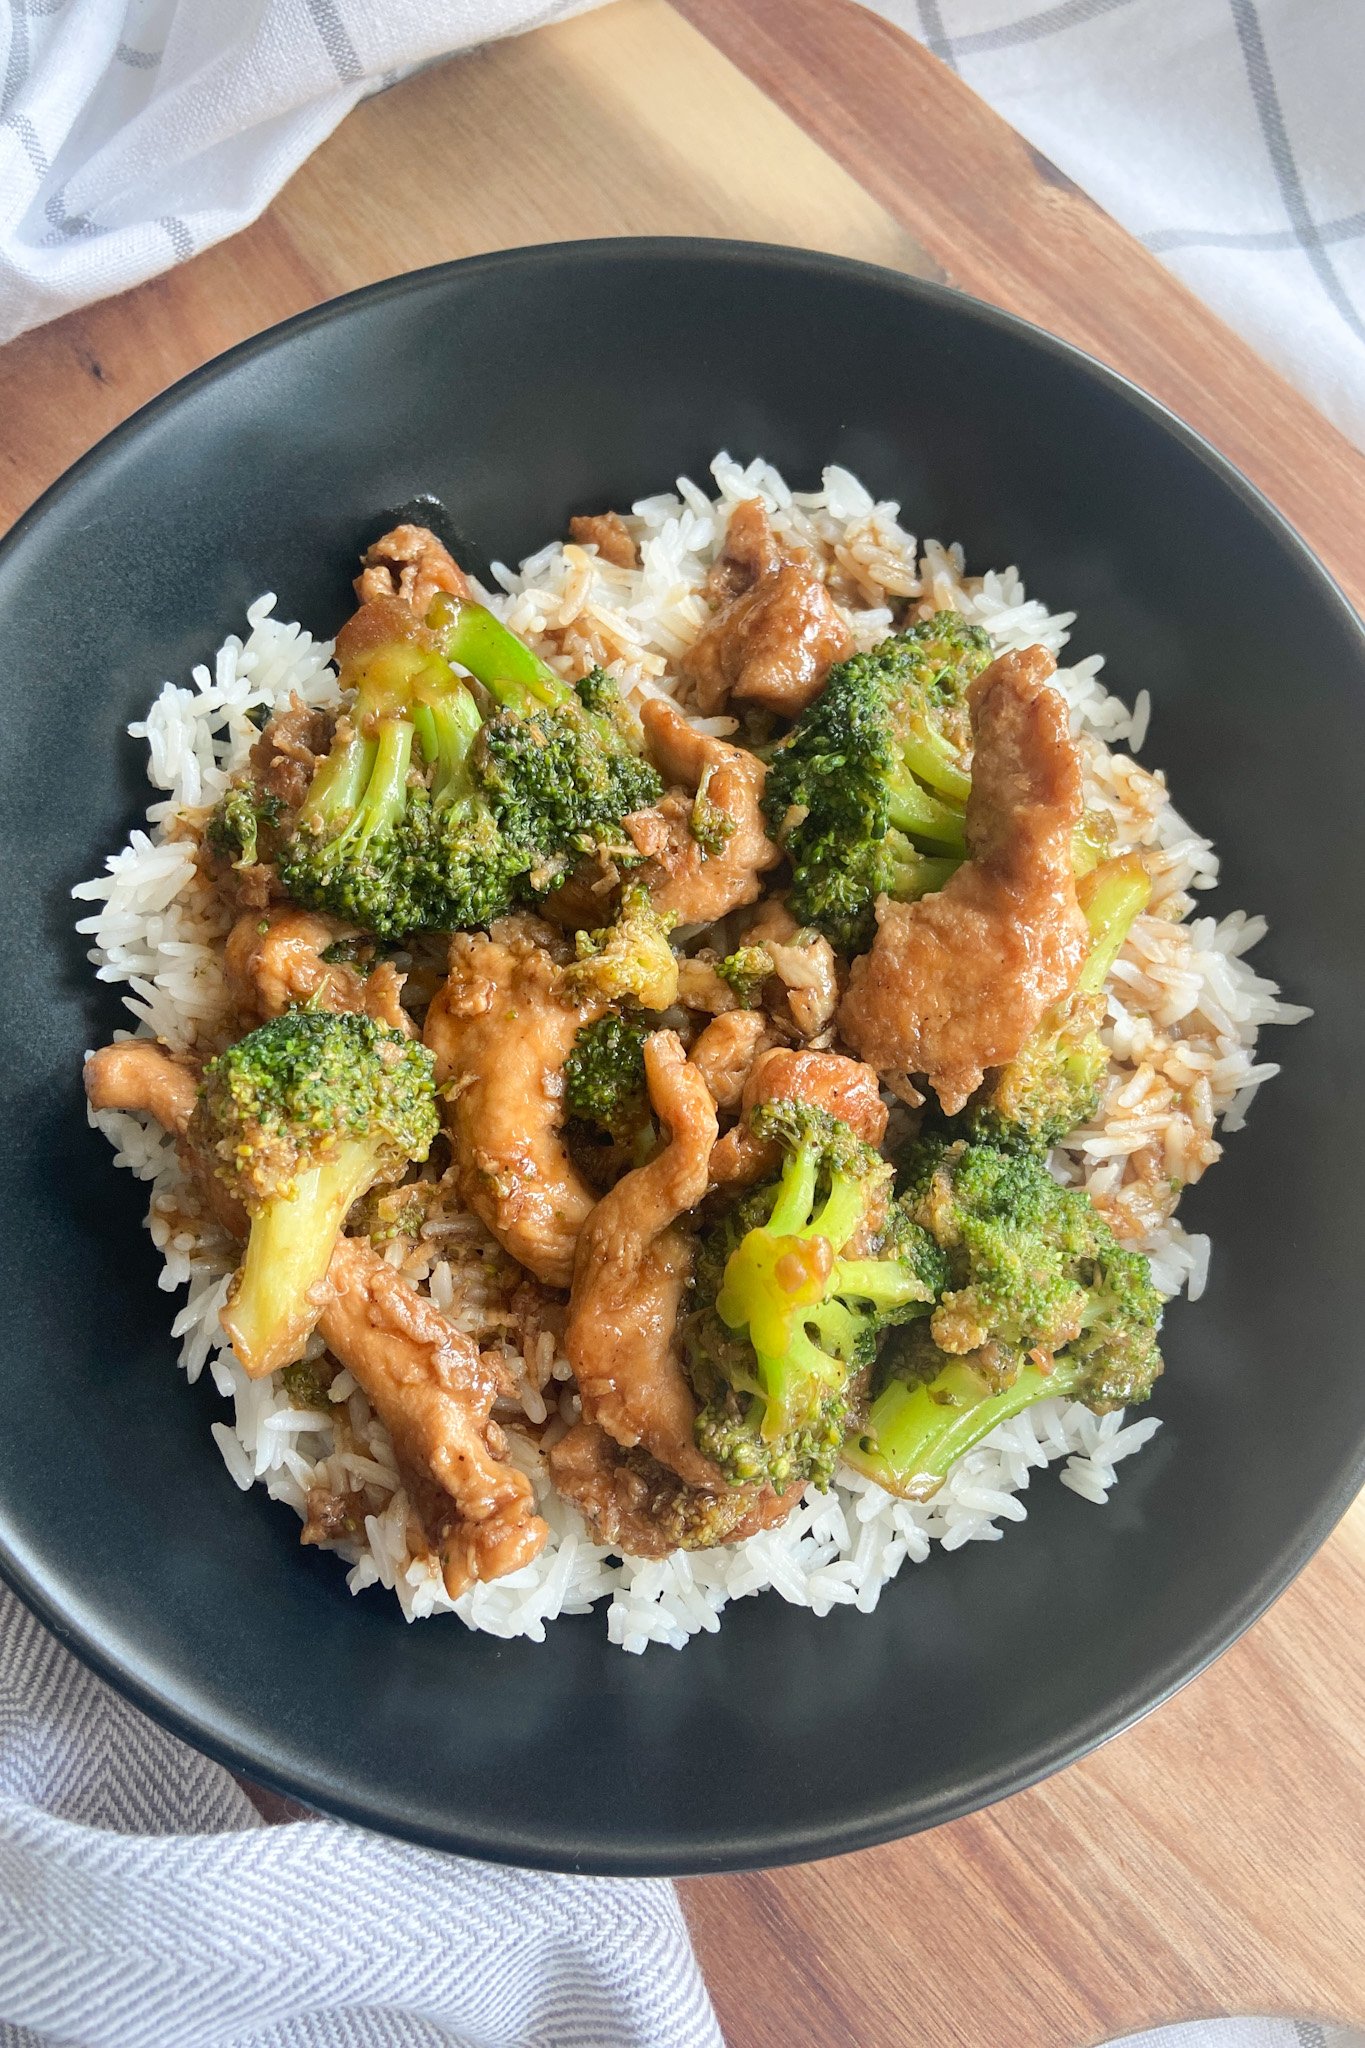 Chicken and broccoli stir-fry served oven white rice in a black bowl.